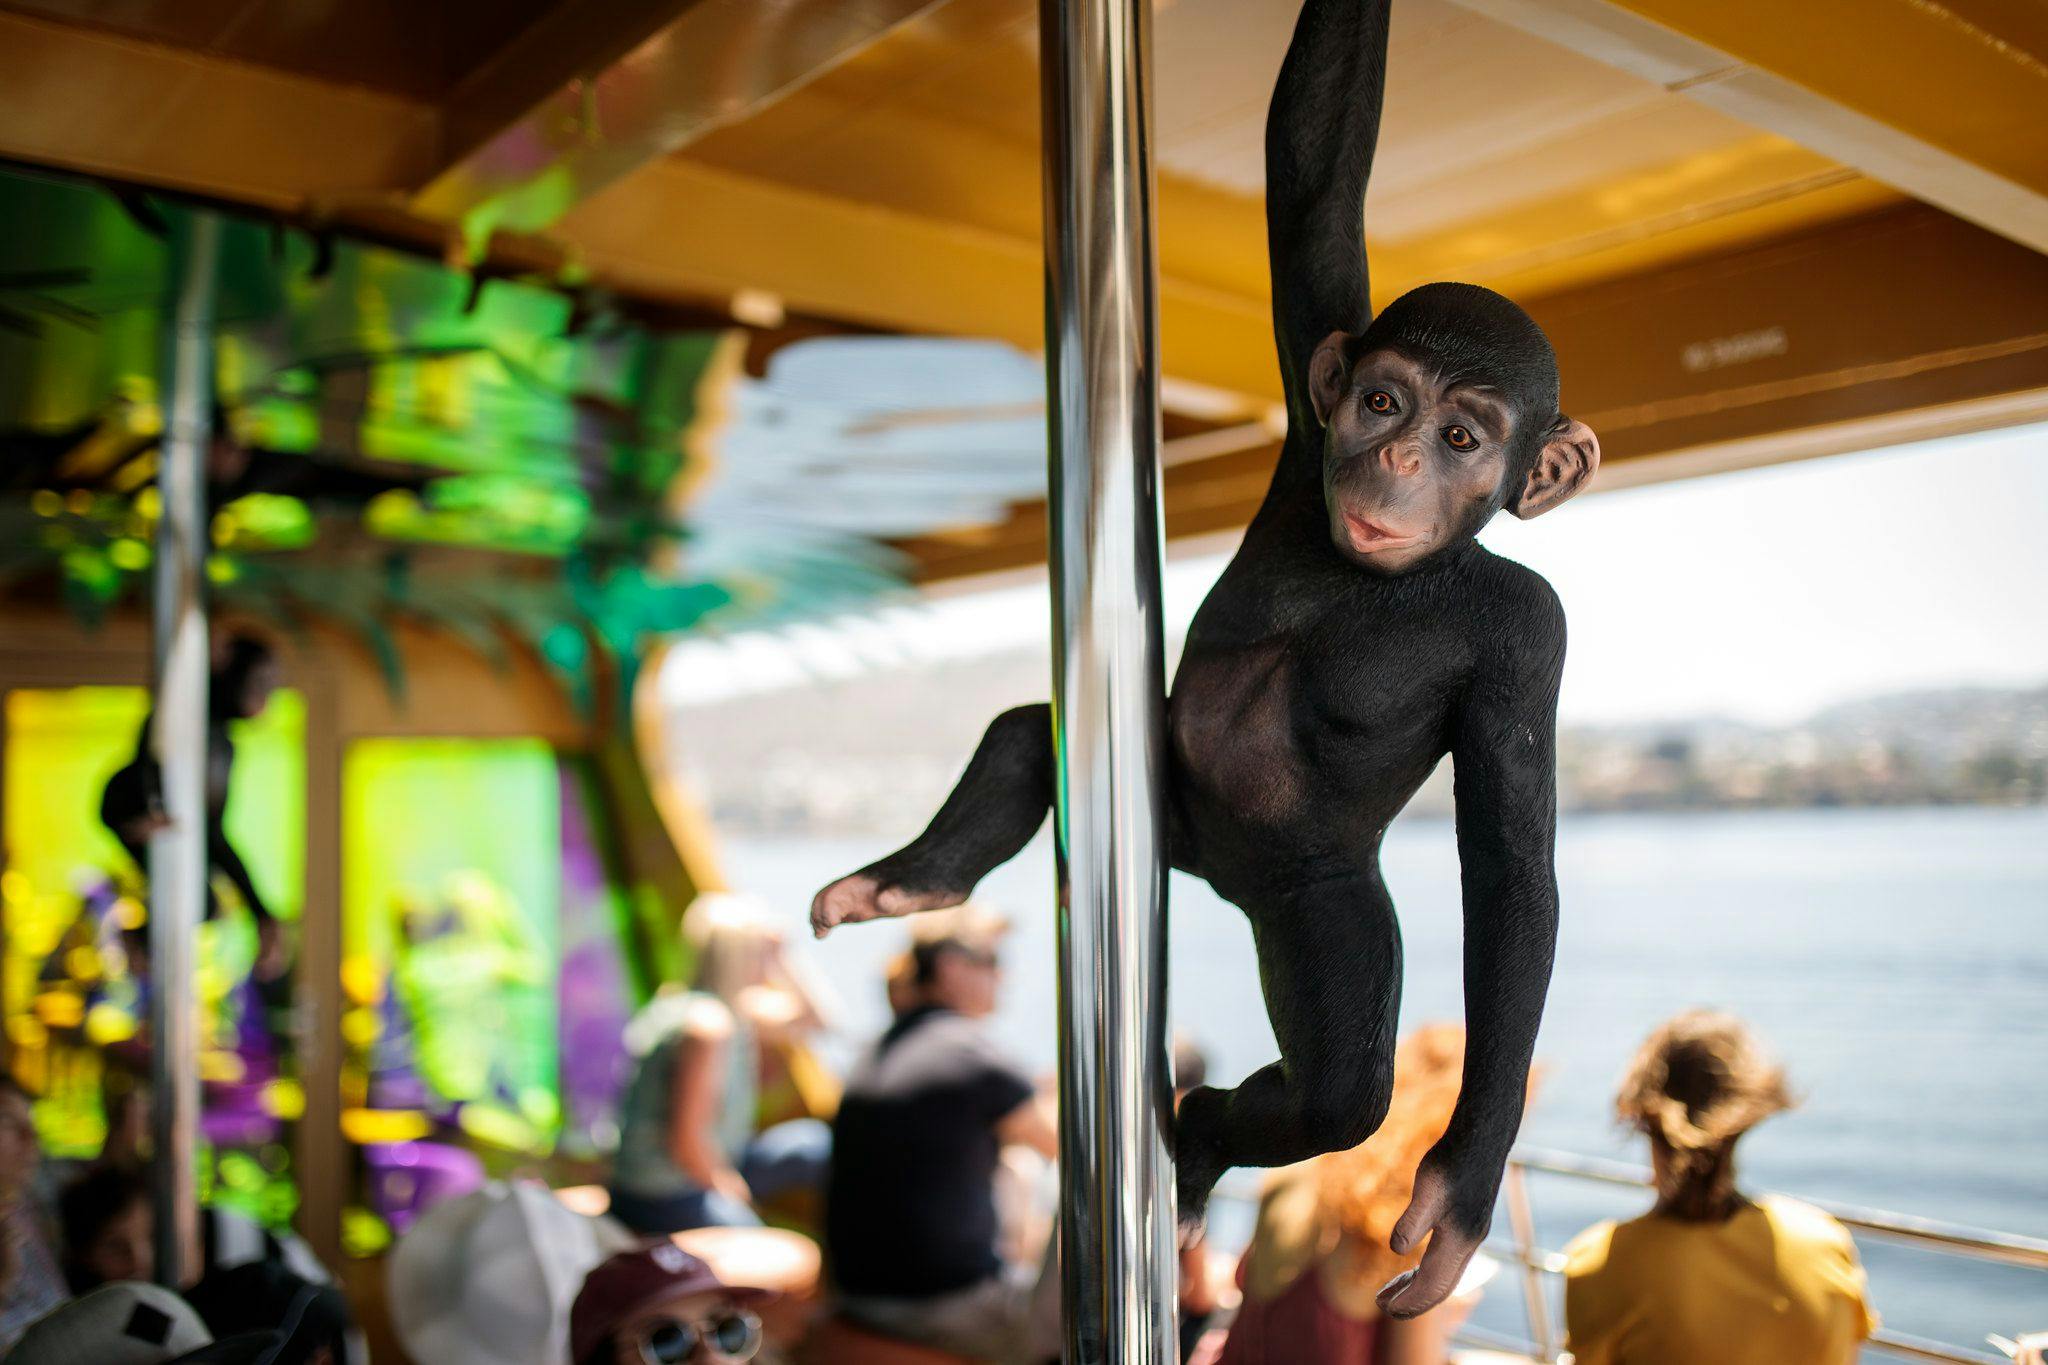 A plastic Chimpanzee hangs from a pole onboard the ferry.